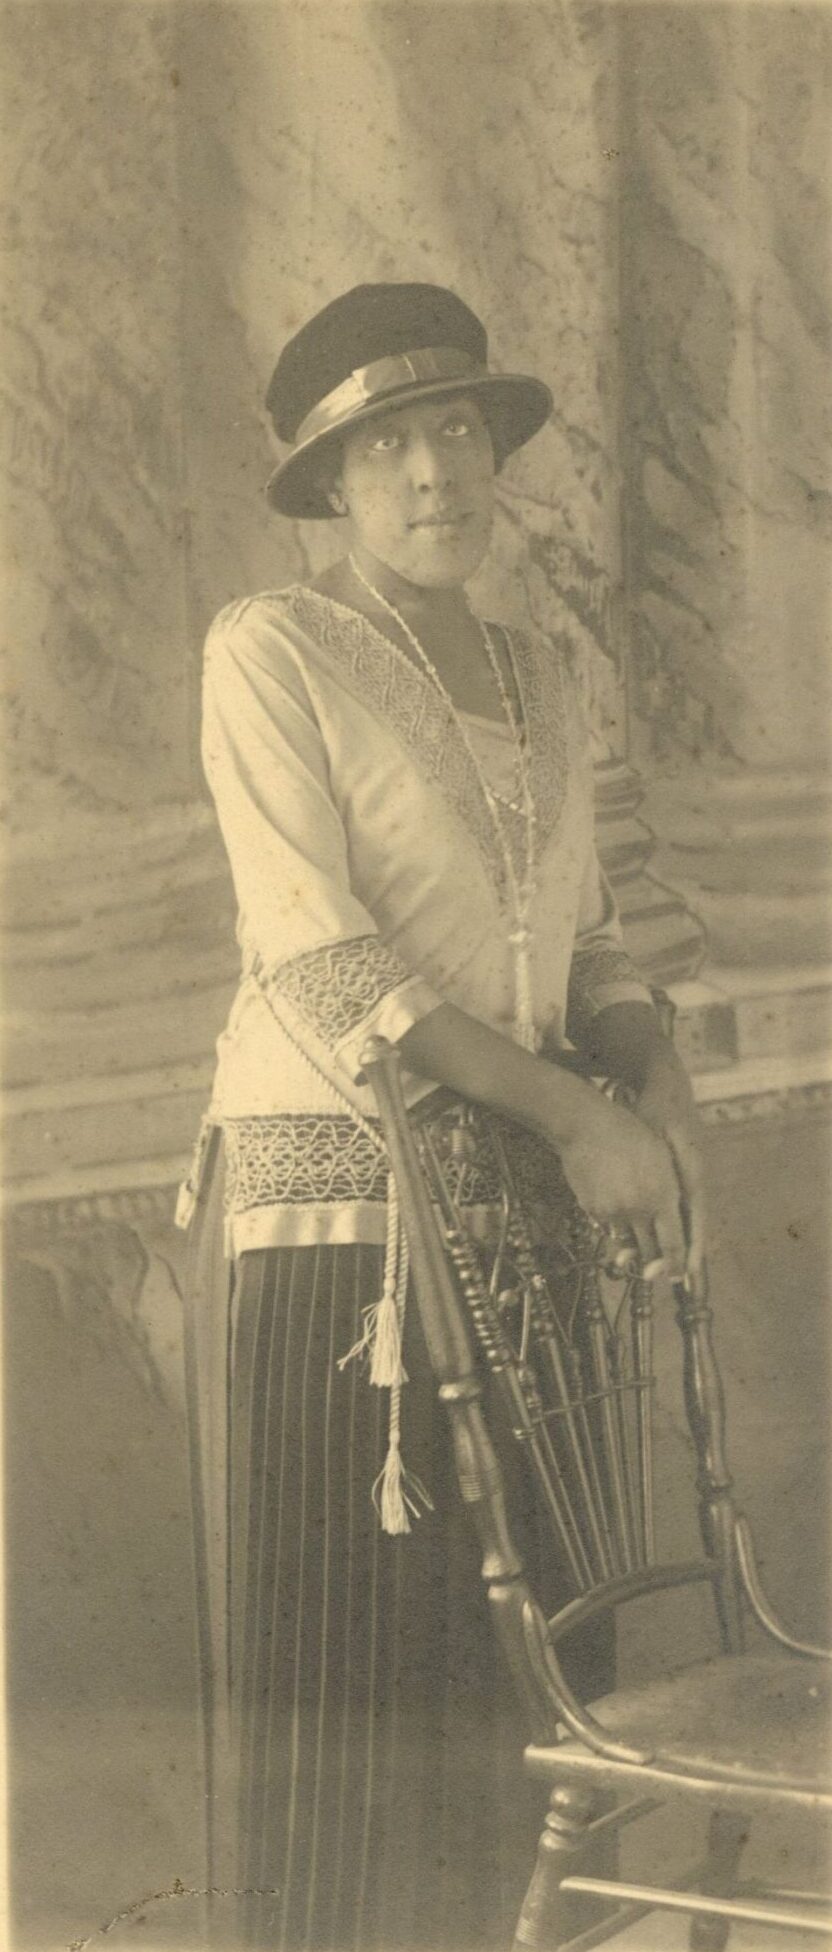 This studio photograph shows a young Black woman standing next to a chair. She is wearing a hat, an embroidered top and a long pleated skirt. 